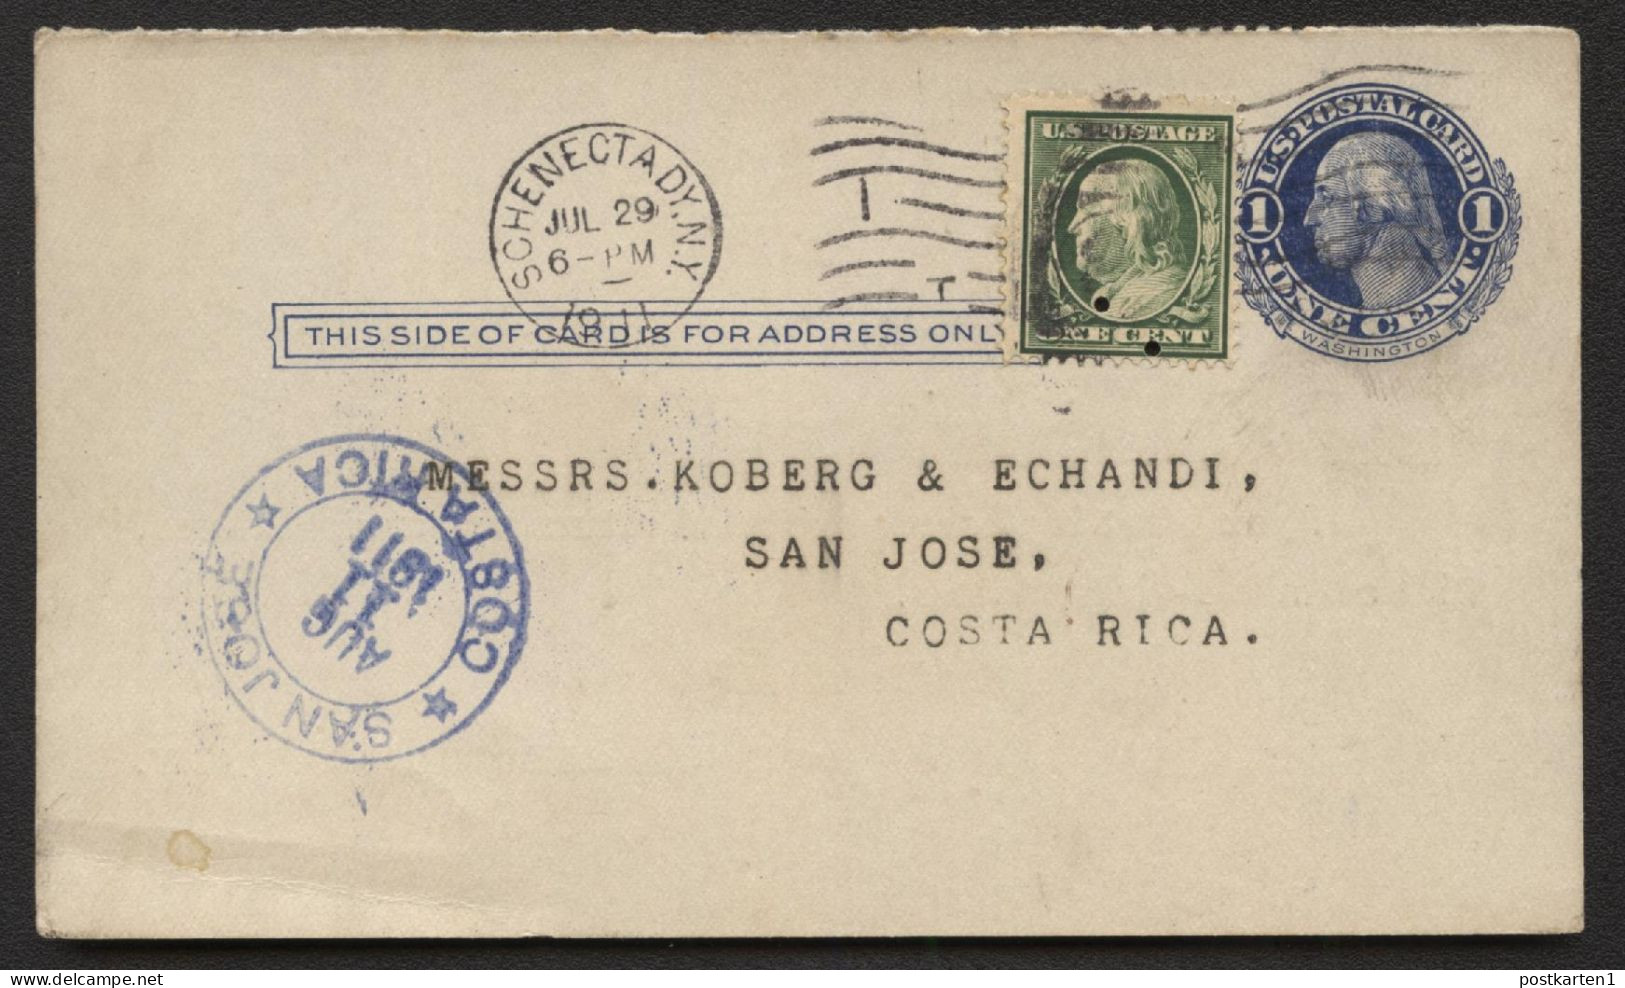 UY5m Message Card Schenectady NY To COSTA RICA 1911 - 1901-20